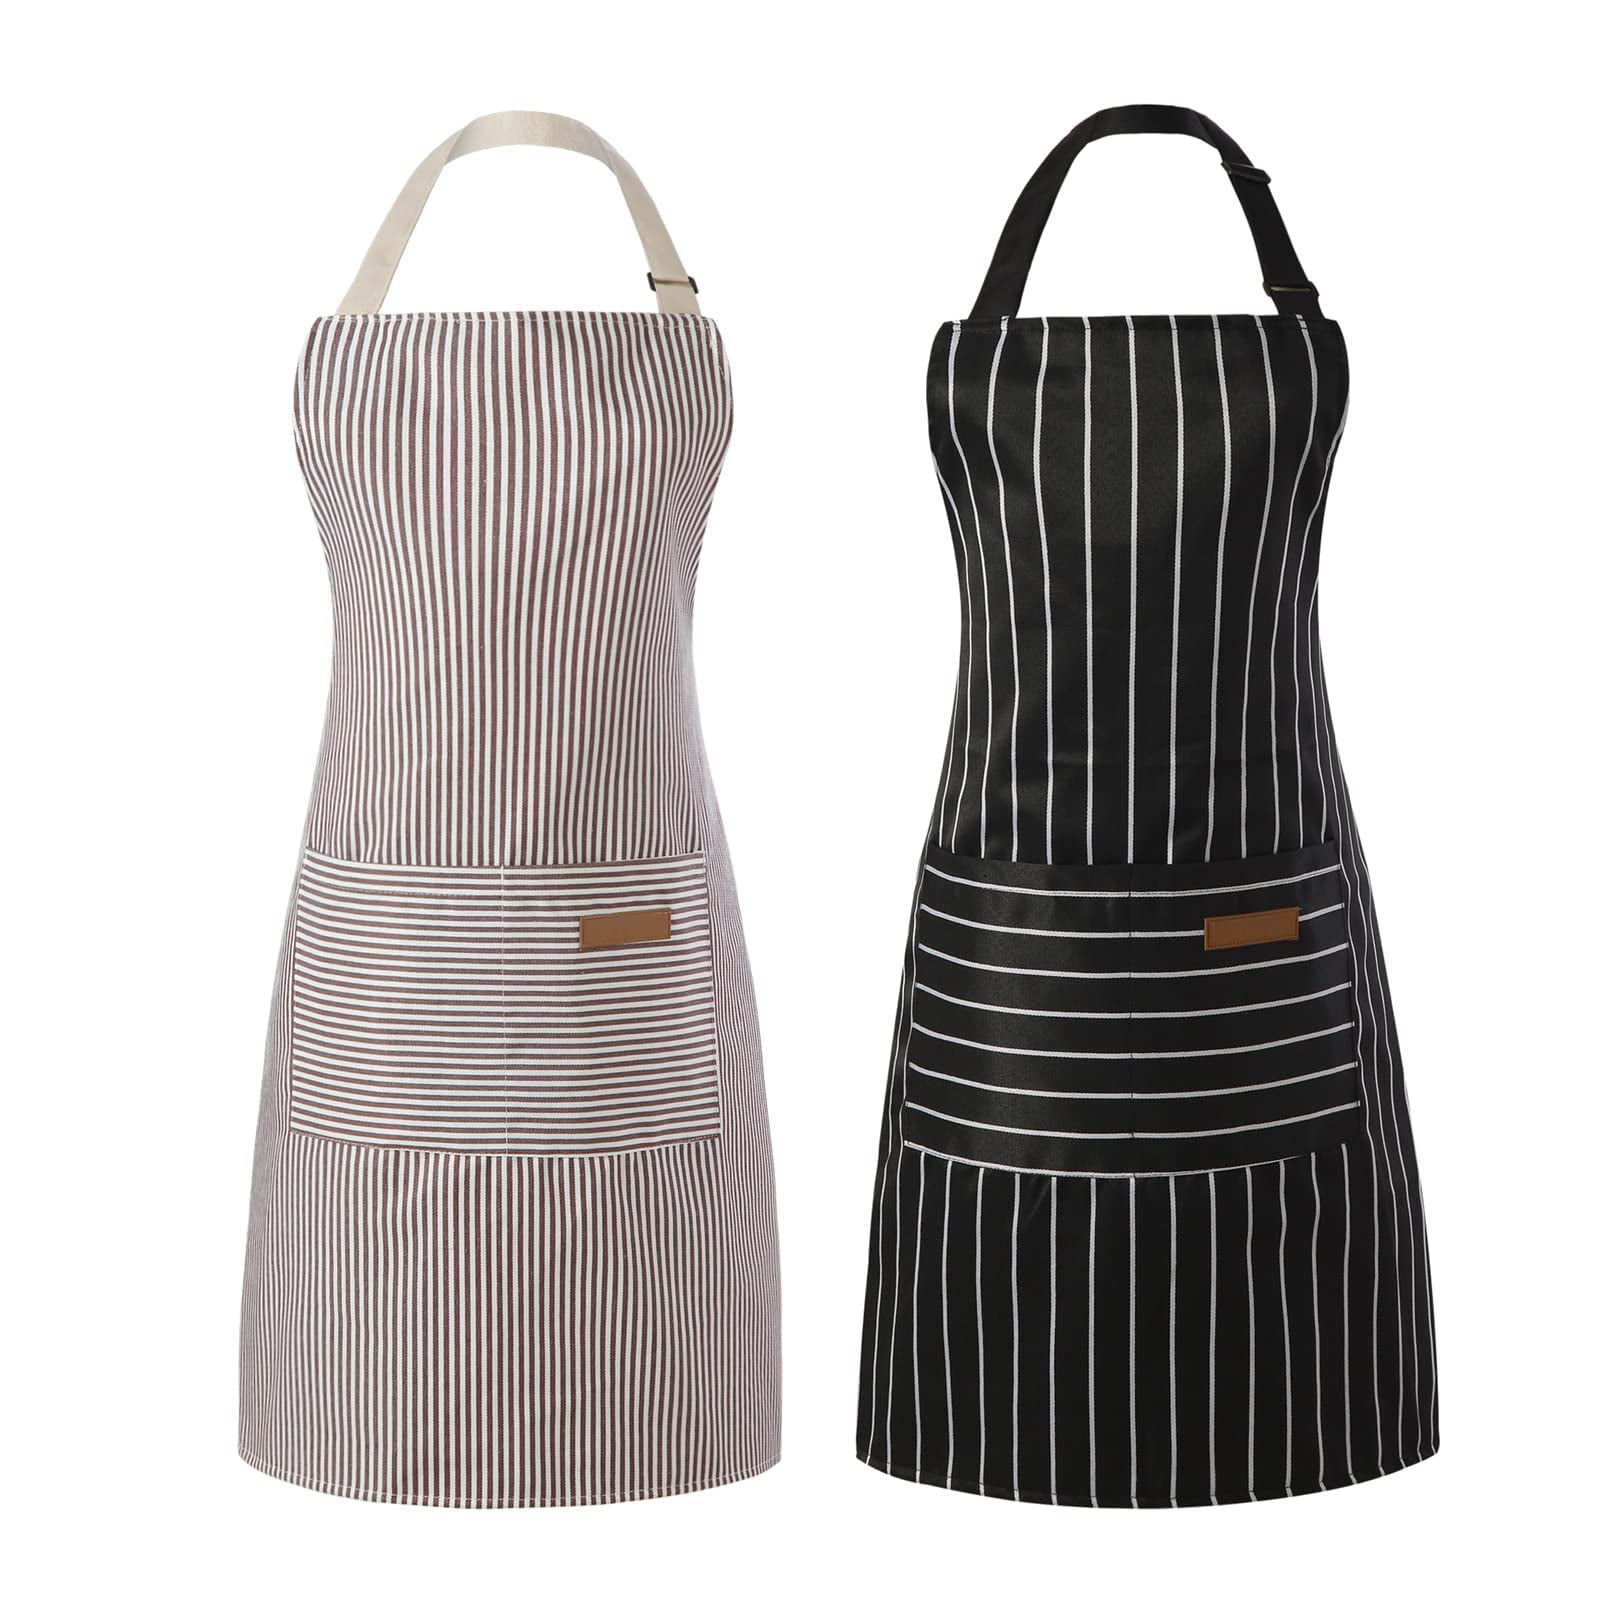  Tosewever 2 Pieces Cotton Linen Waterproof Bib Kitchen Apron  with Pockets - Long Ties Adjustable Neck Strap - Unisex BBQ Cooking Drawing  Crafting Aprons for Women Chef (Grey/Green, 2) : Home & Kitchen